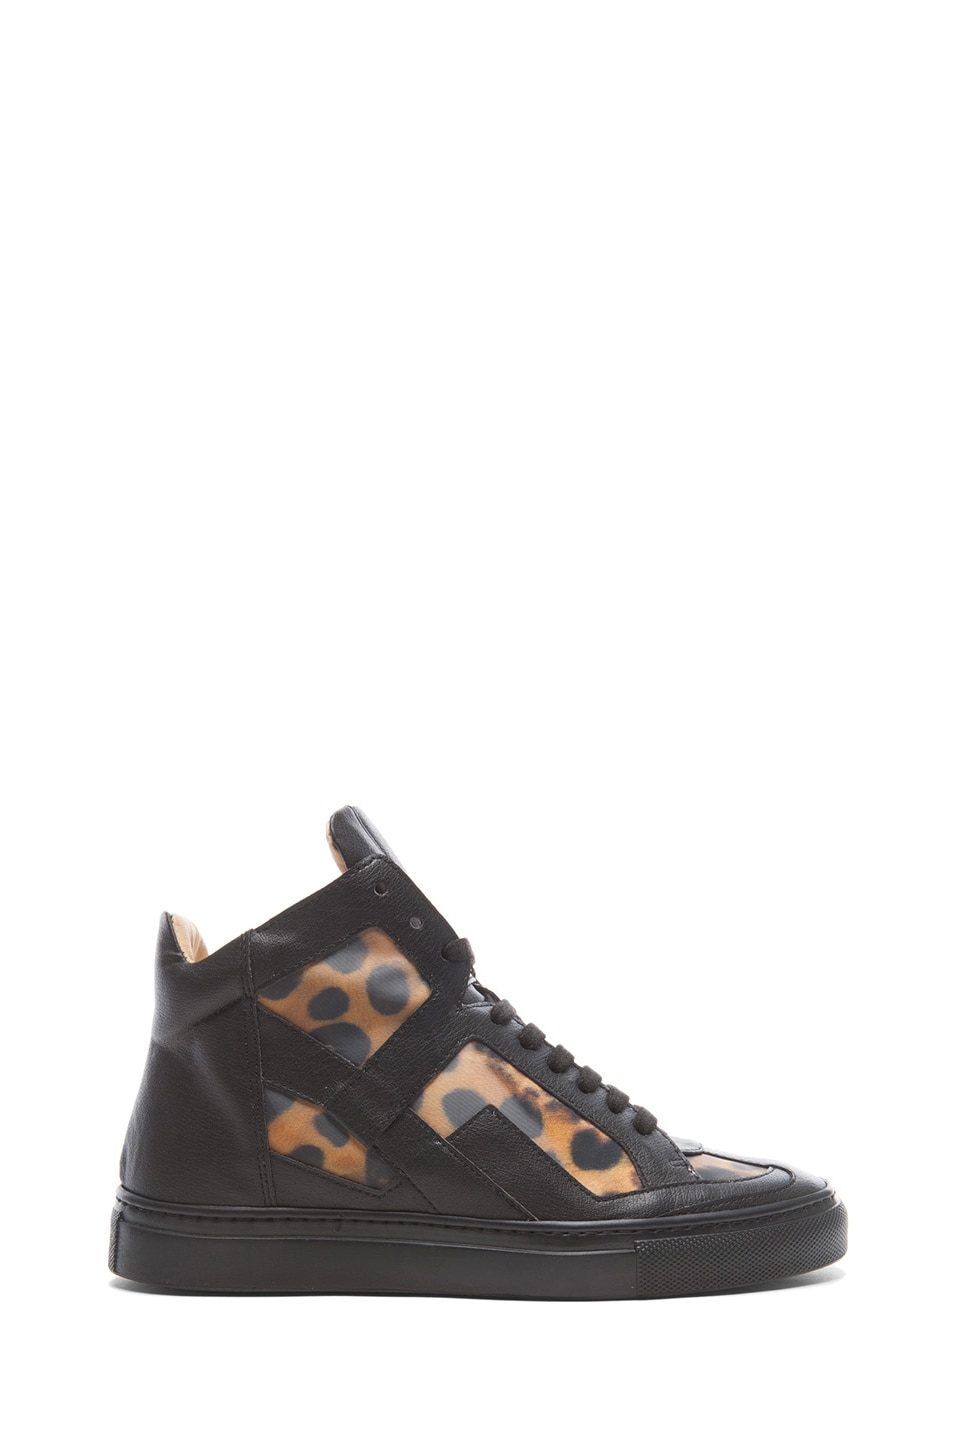 Image 1 of MM6 Maison Margiela Leather High Top Sneakers in Black & Leopard